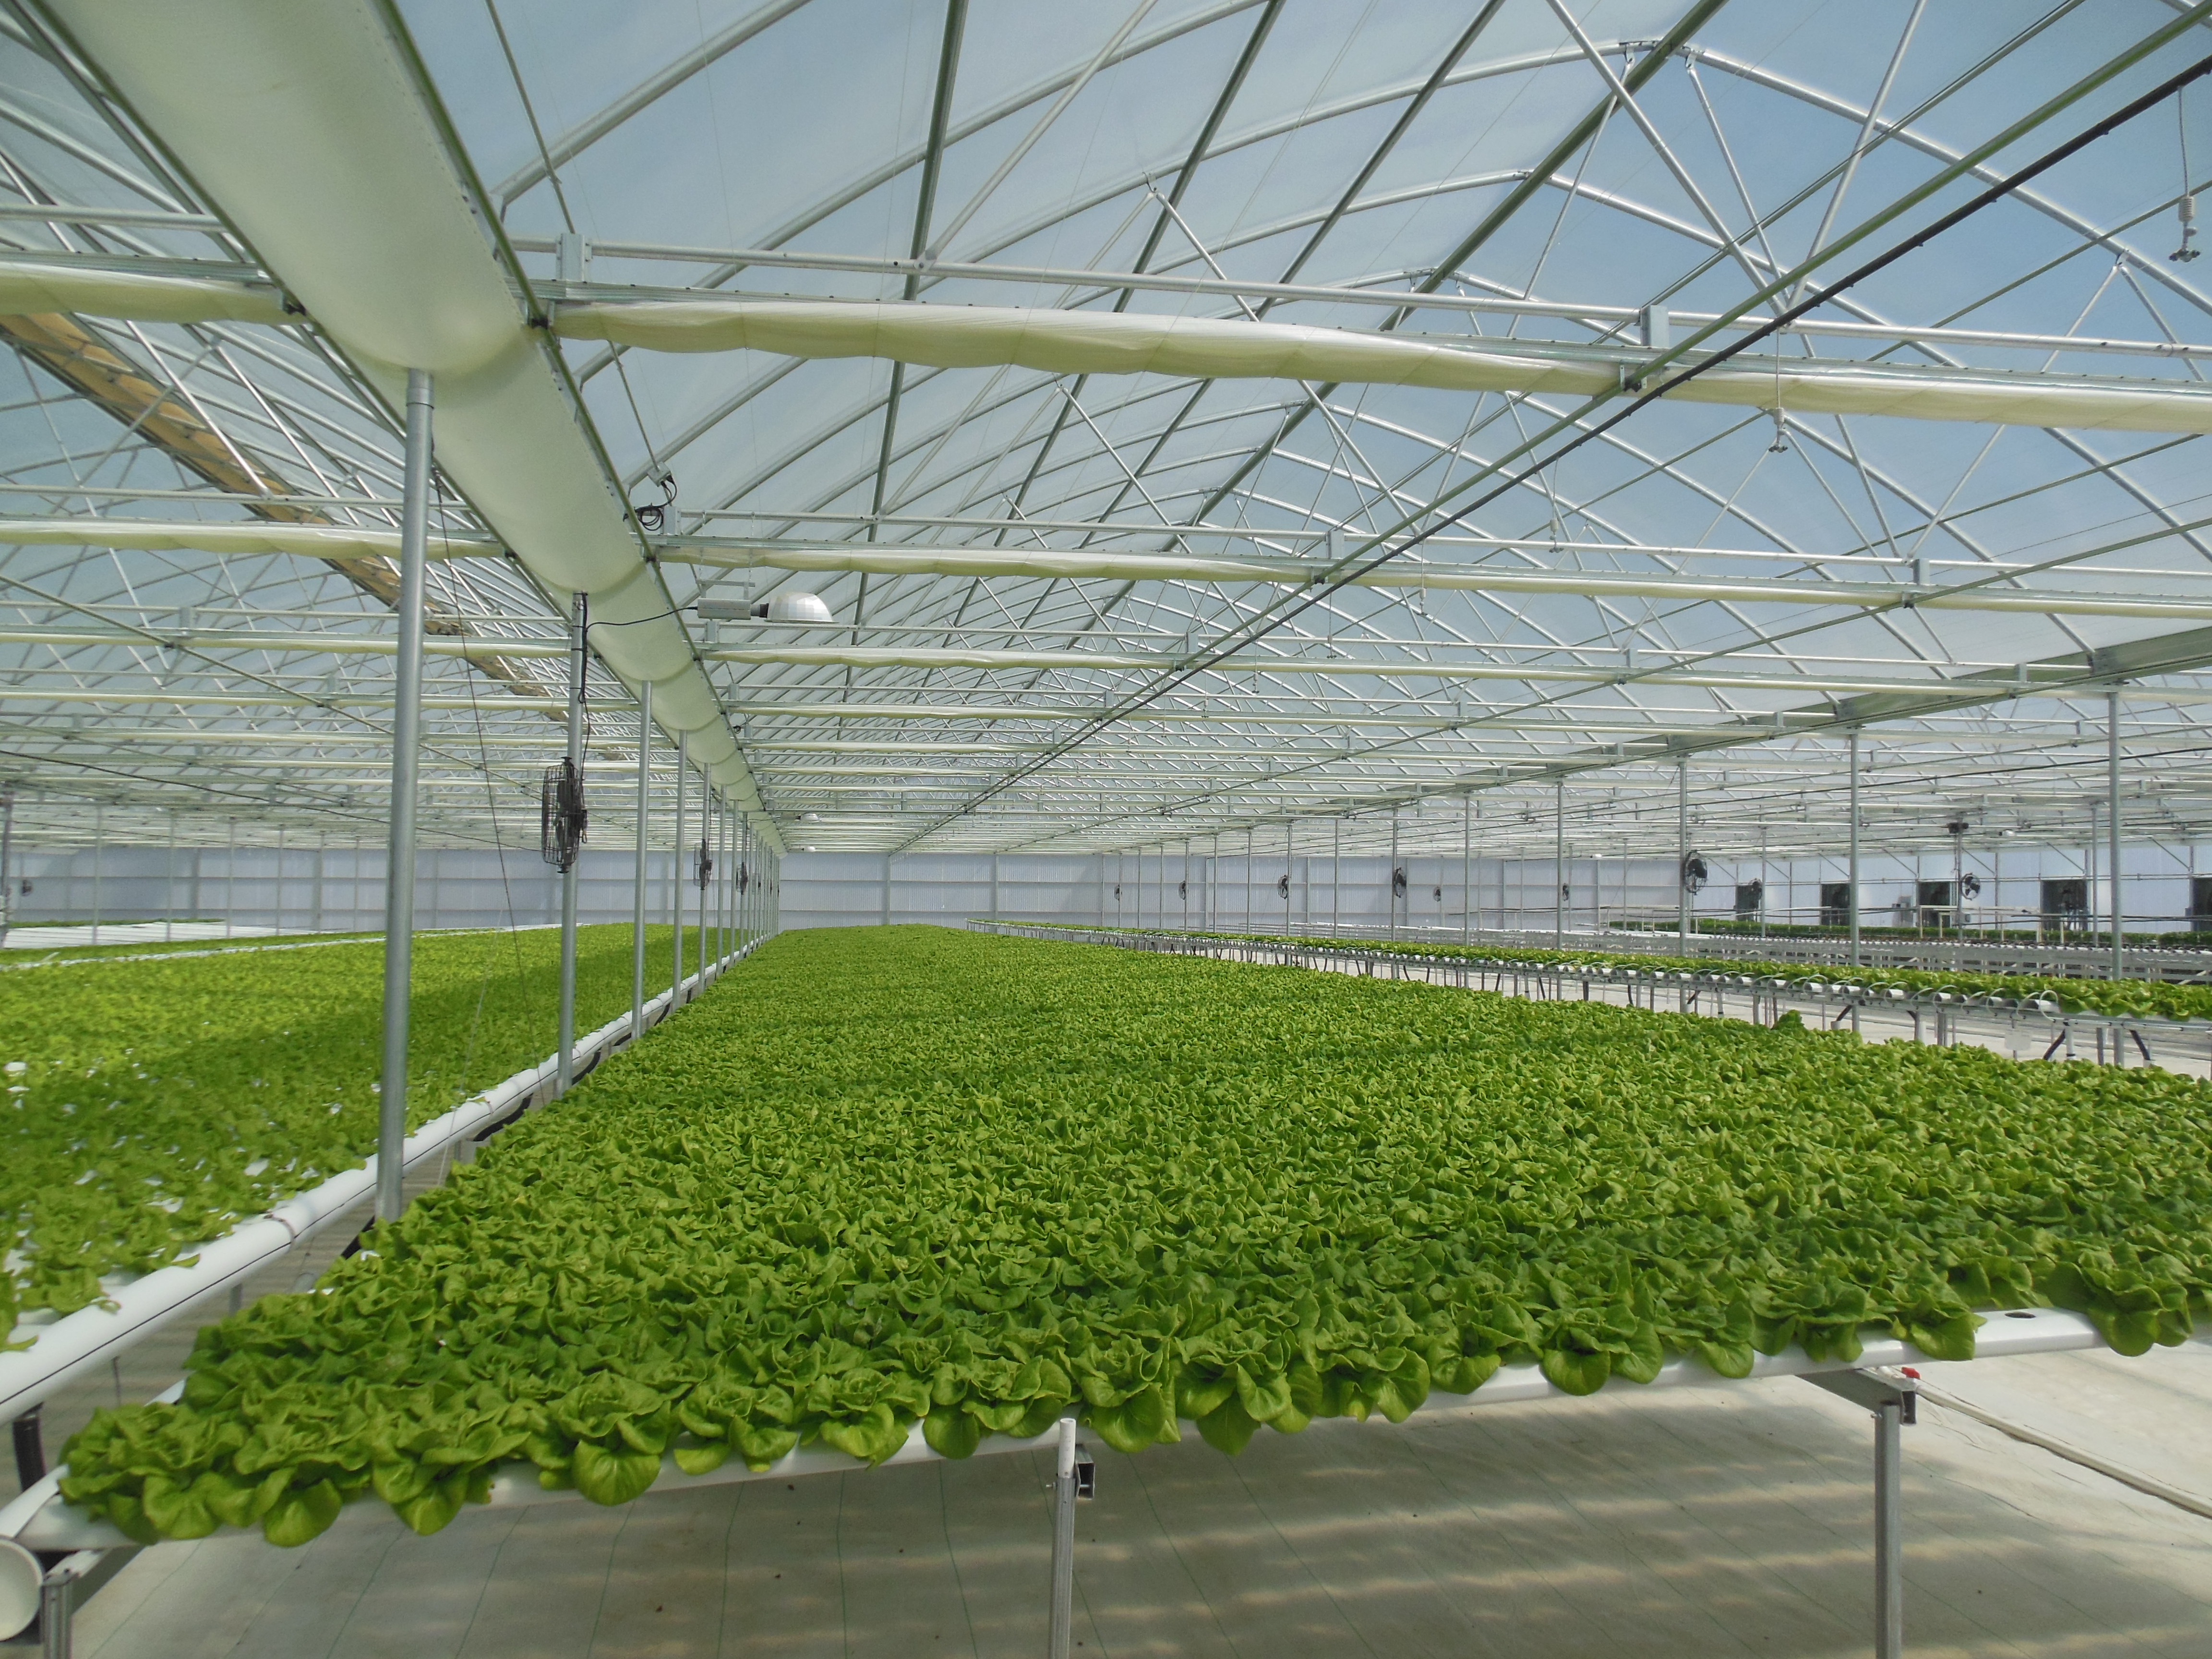 Commercial greenhouse business plan